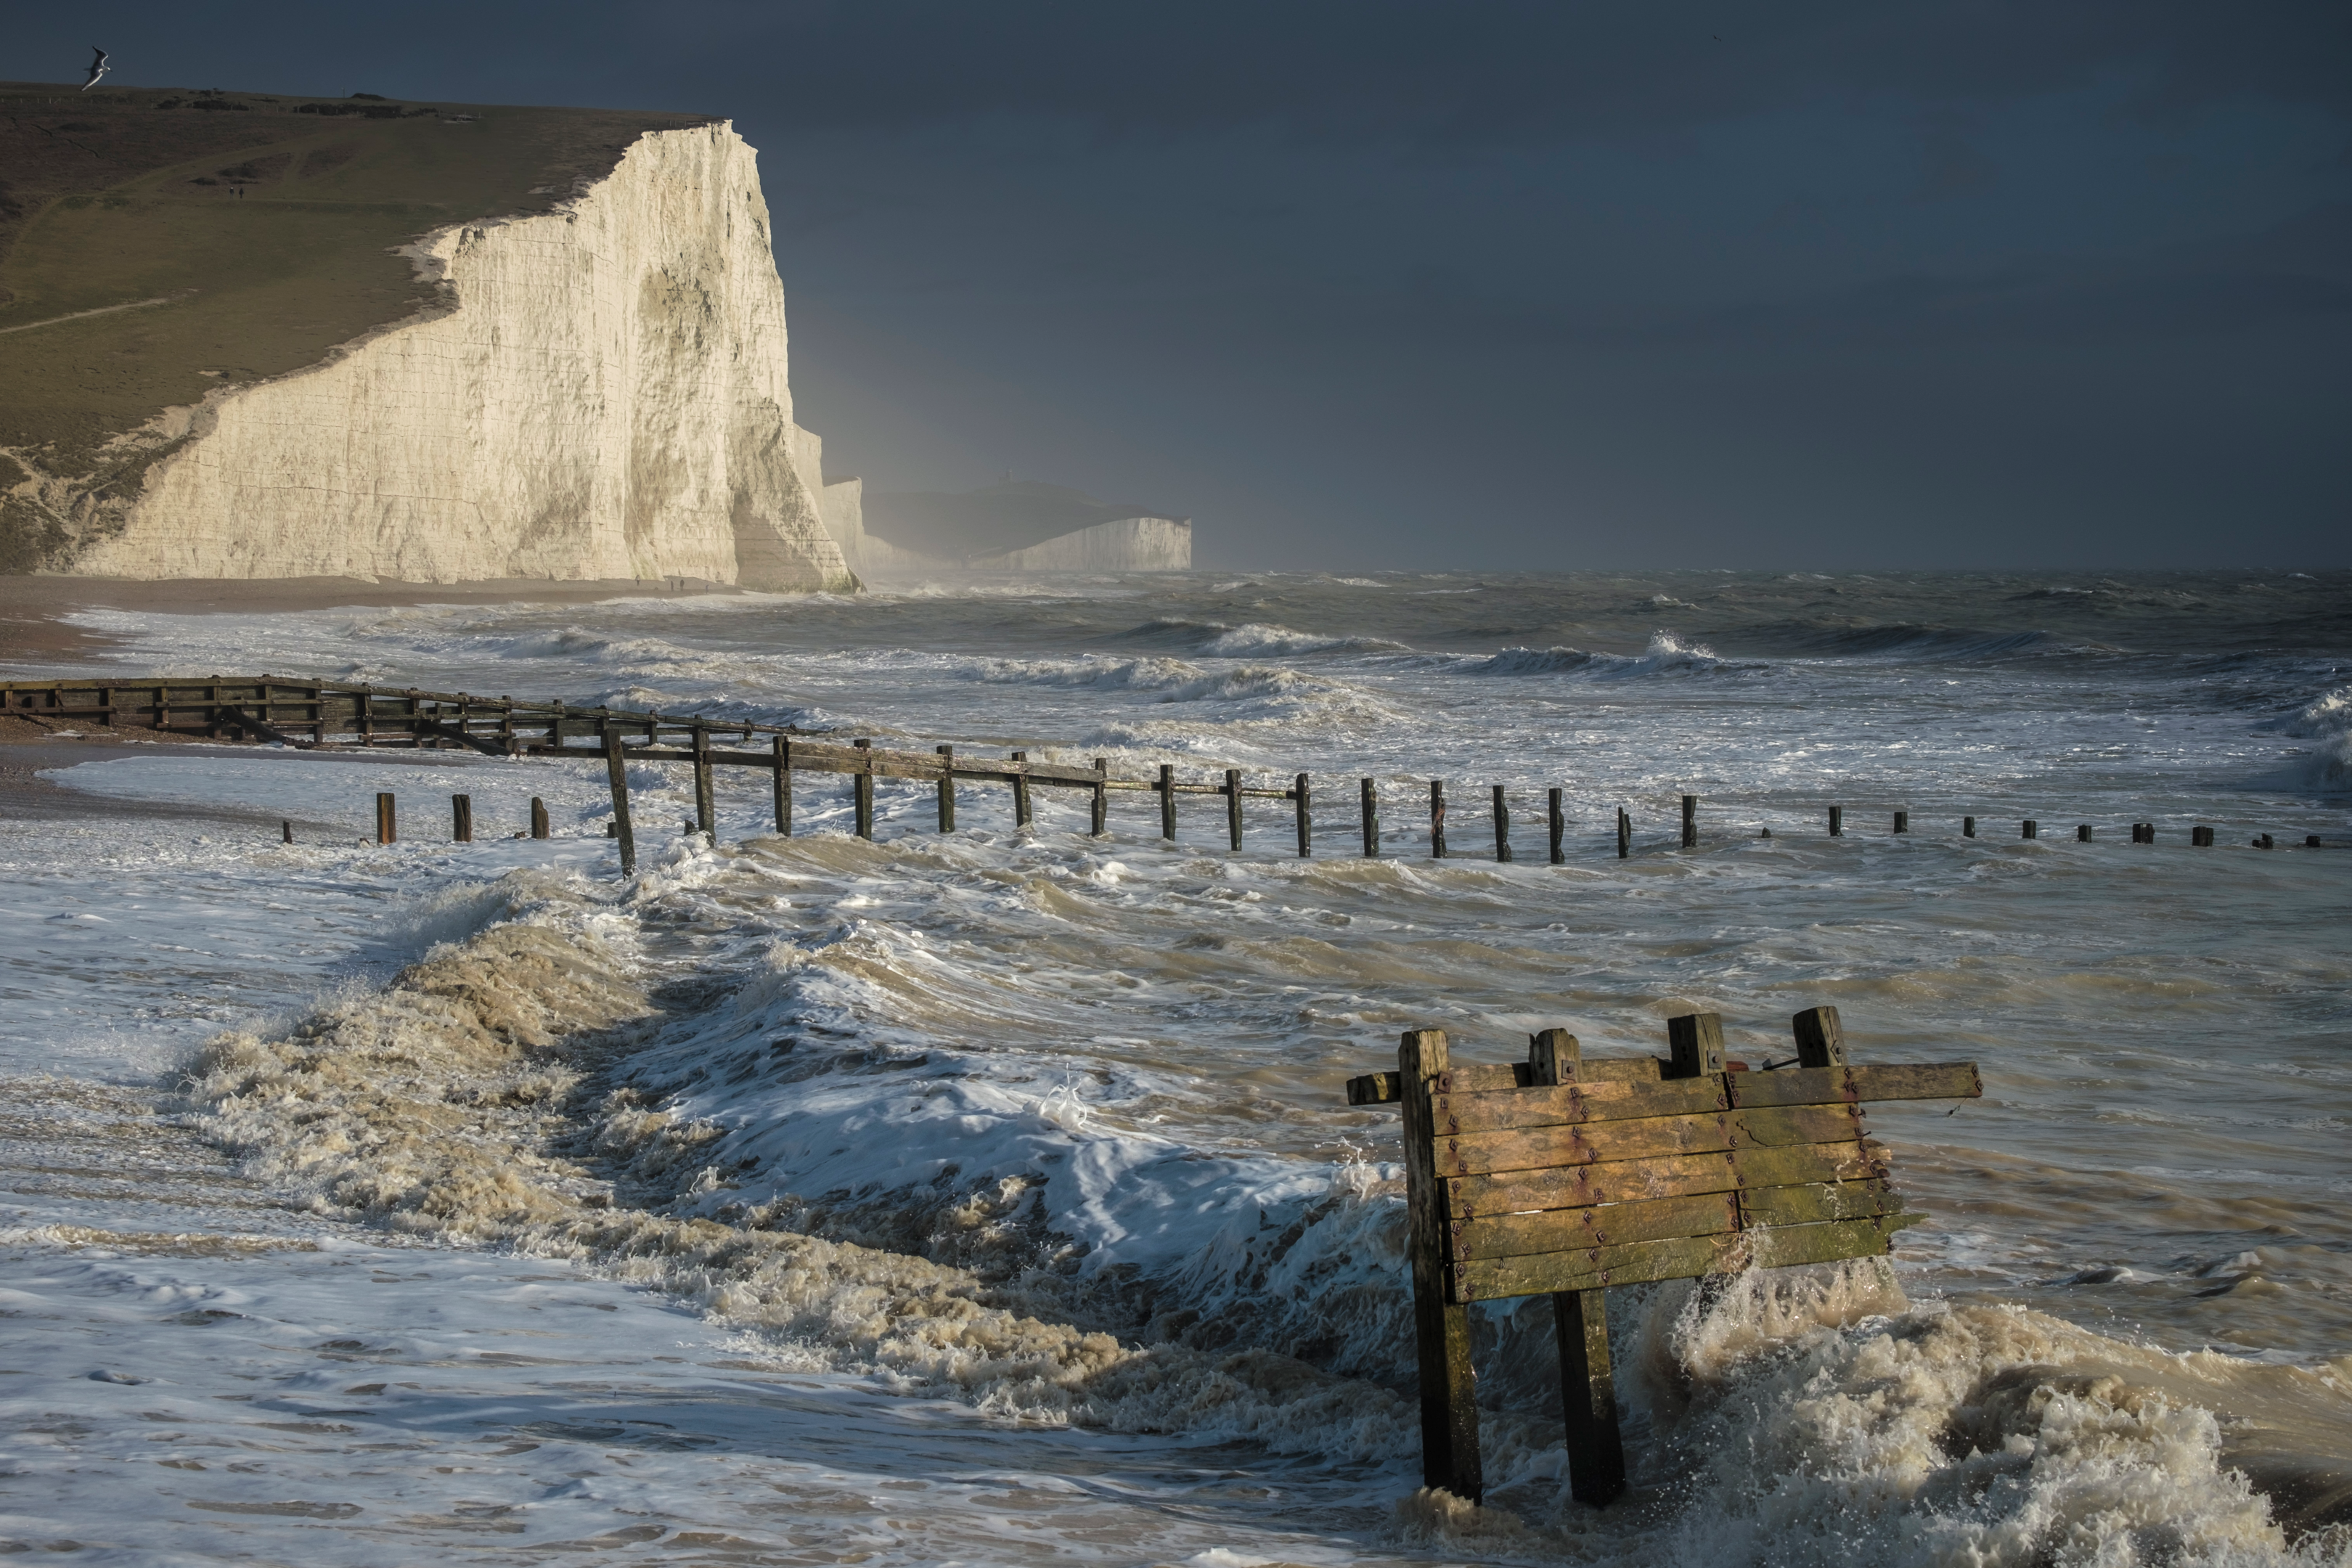 White cliffs in southern England during a storm. By www.jasonrowphotography.co.uk.